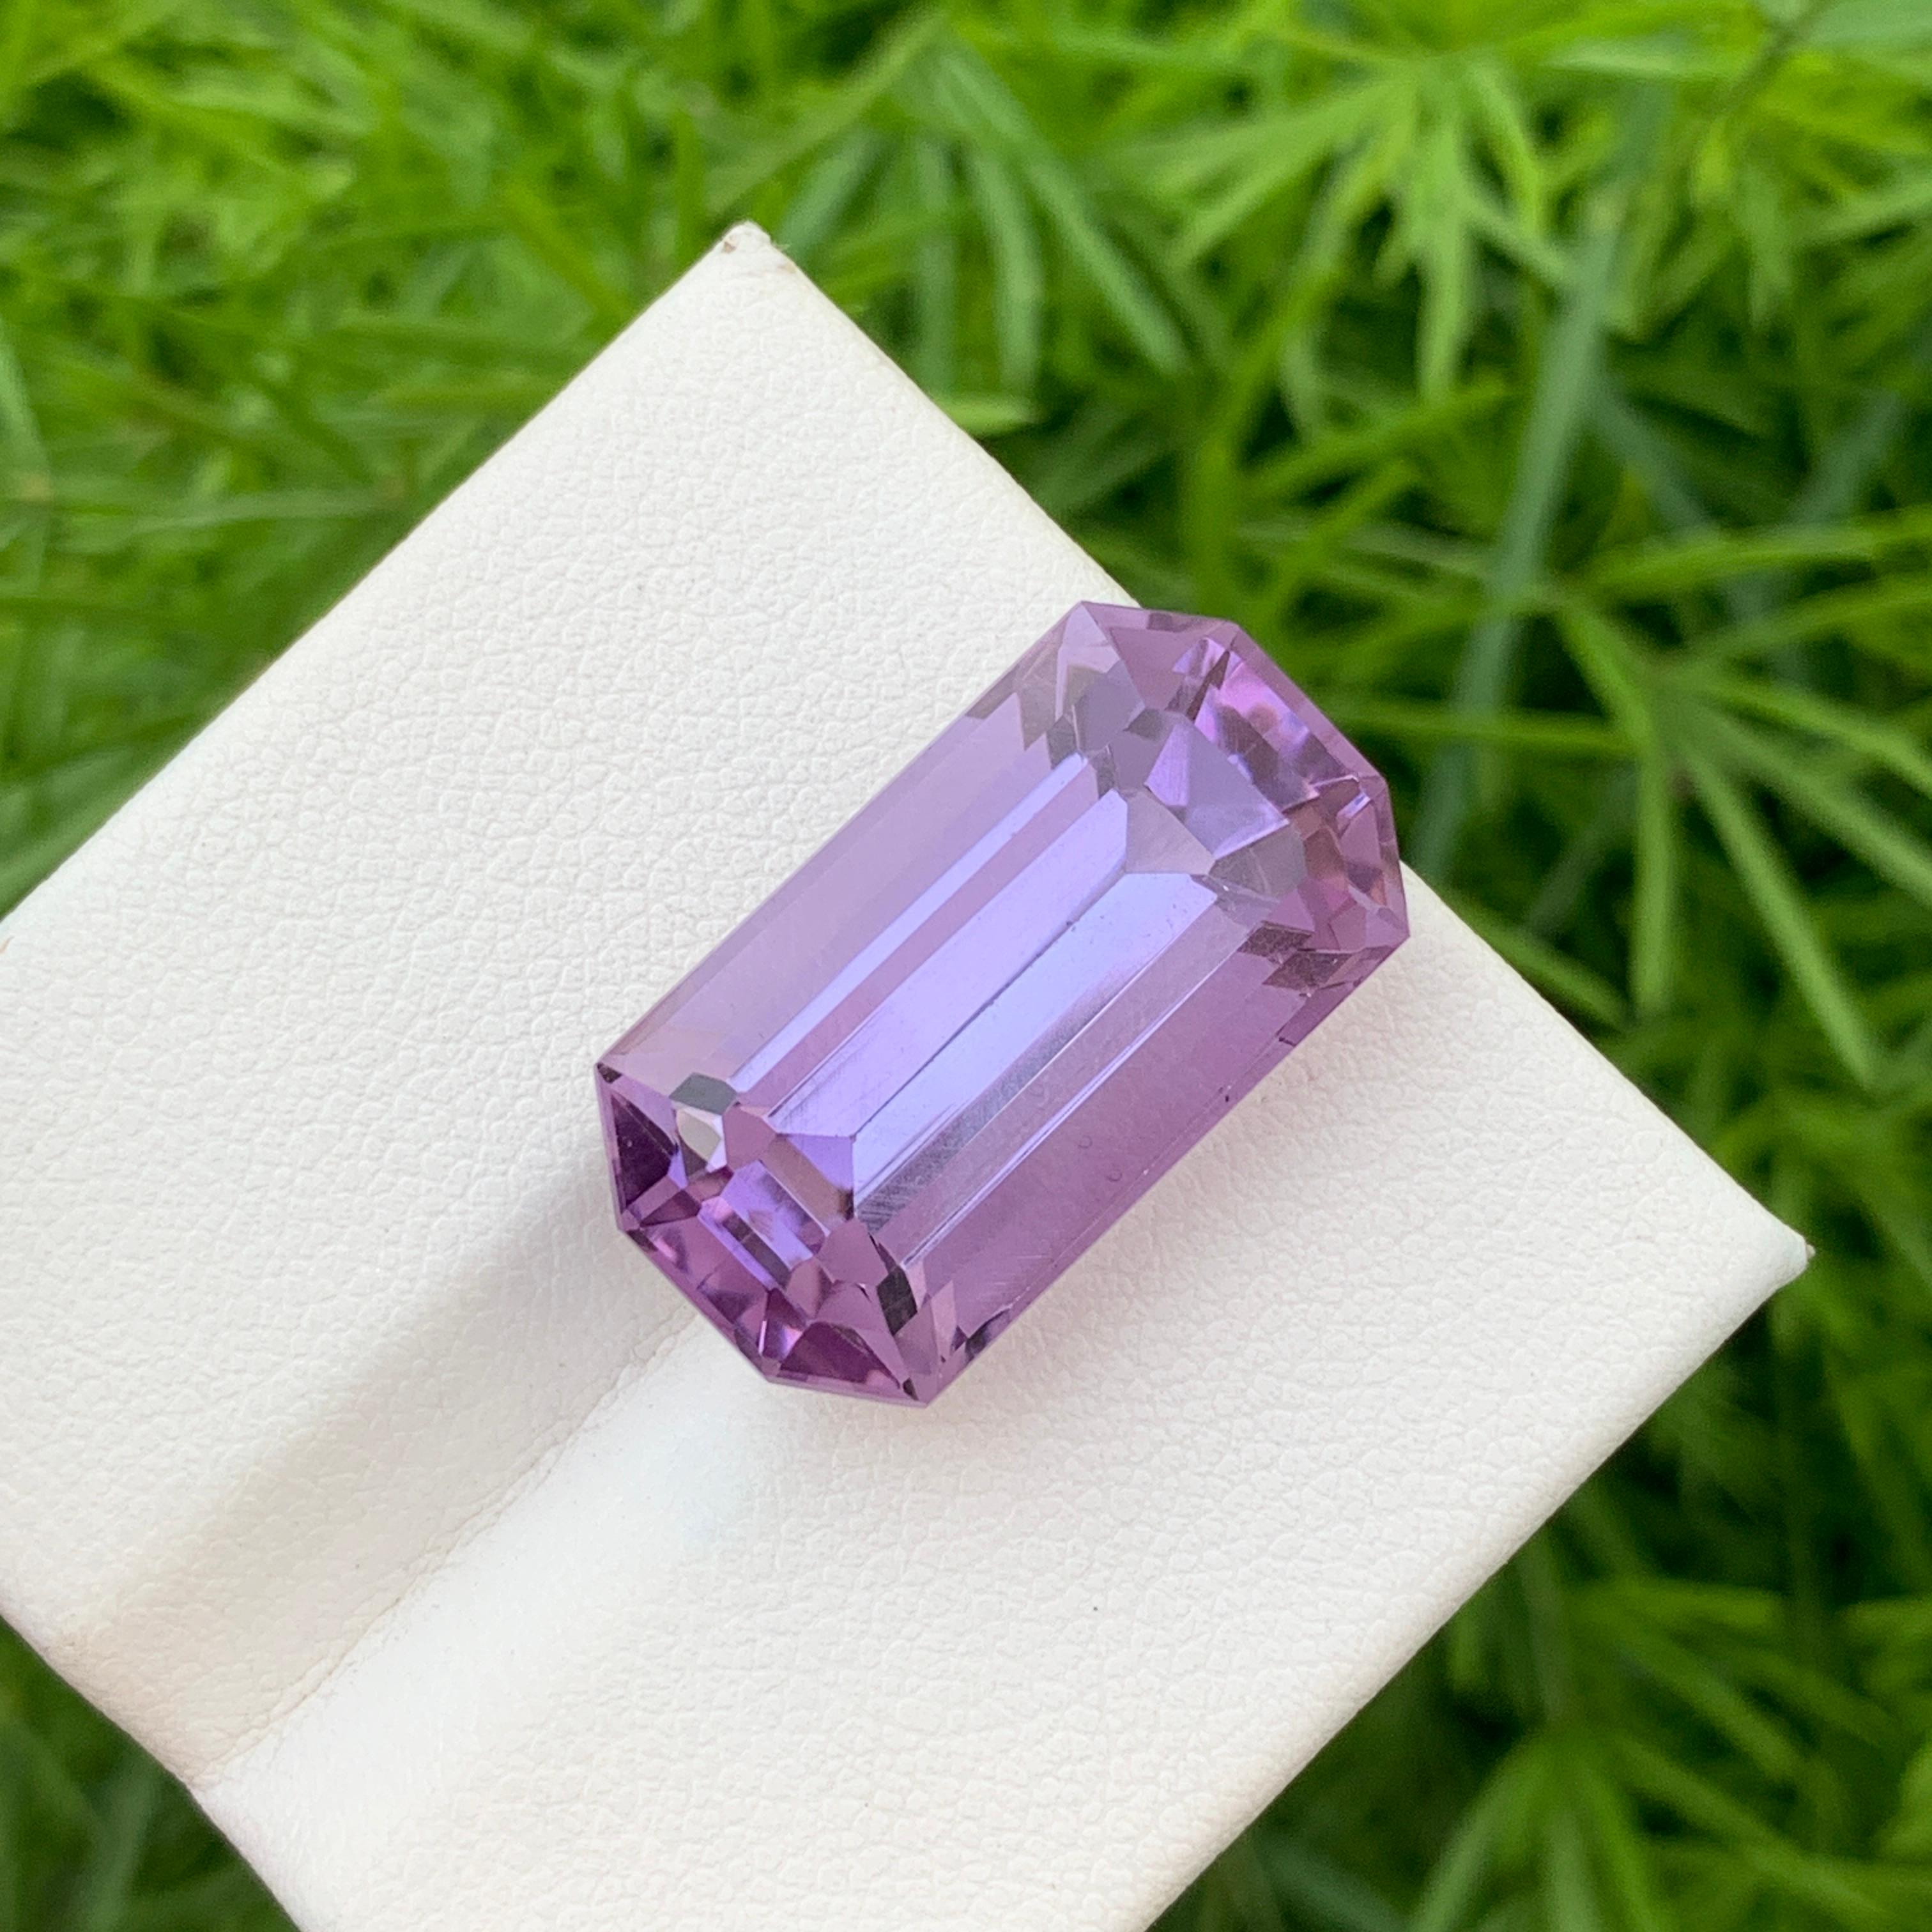 Faceted Amethyst
Weight: 23.55 Carats
Dimension: 23x12.6x11.4 Mm
Origin: Brazil
Color: Purple
Shape: Emerald
Treatment: Non
Certificate: On Client Demand
Amethyst, a striking and revered gemstone, holds a special place in the world of gemology and